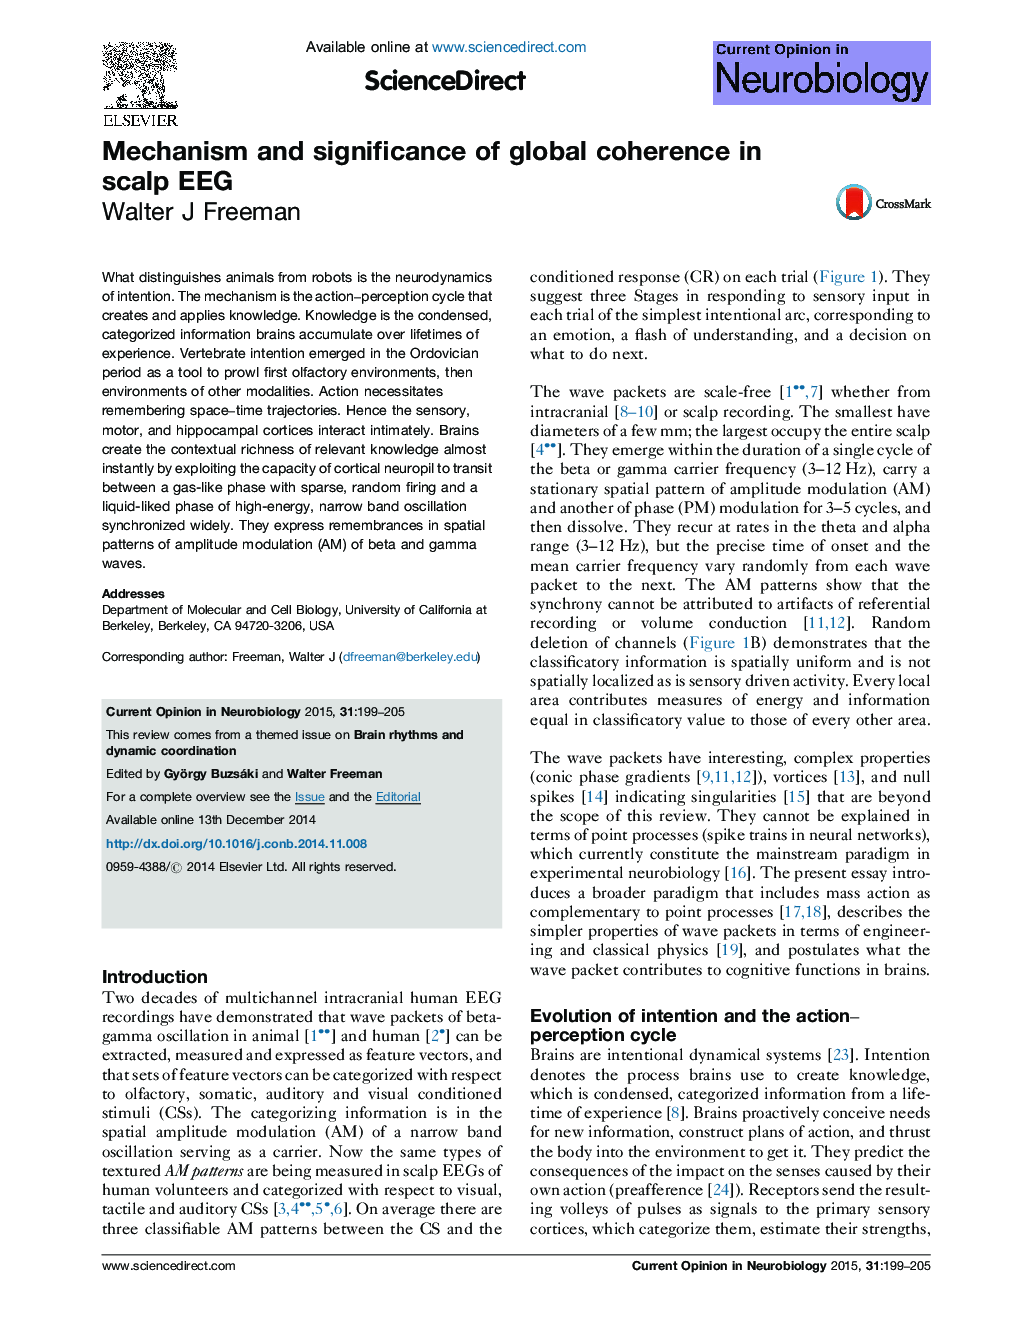 Mechanism and significance of global coherence in scalp EEG